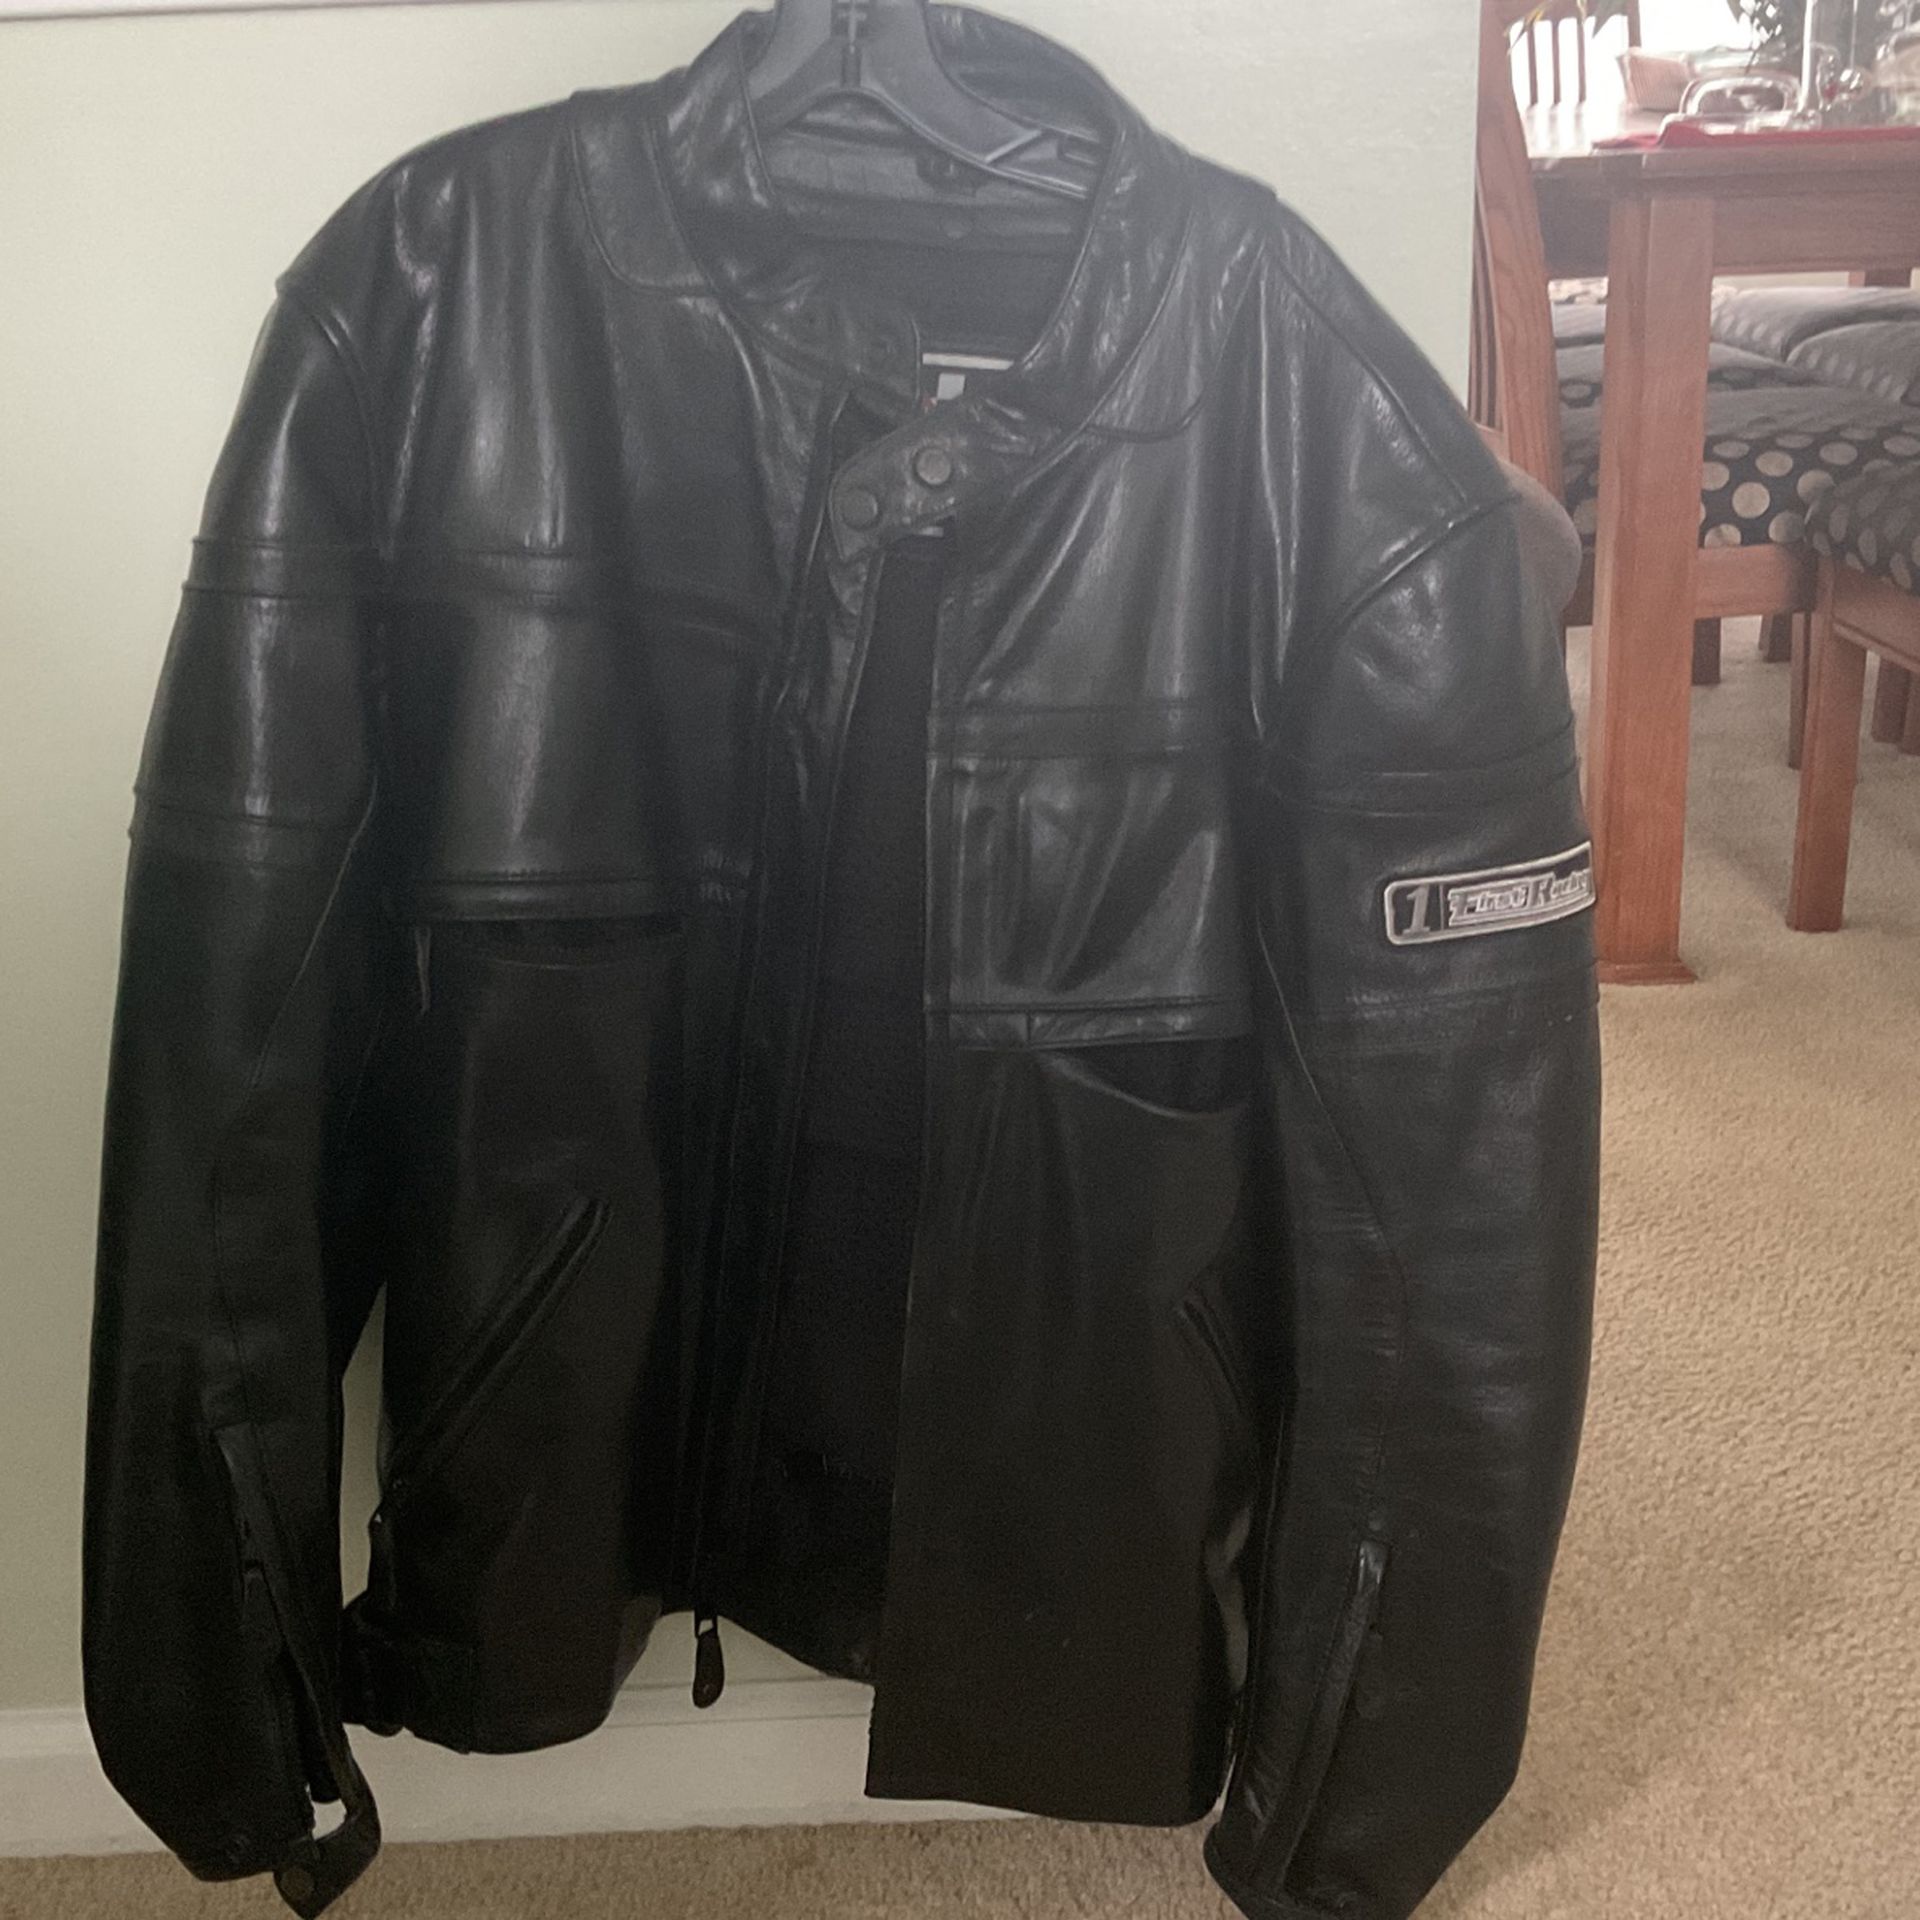 This is a motorcycle jacket larger with a padding at the elbows and back